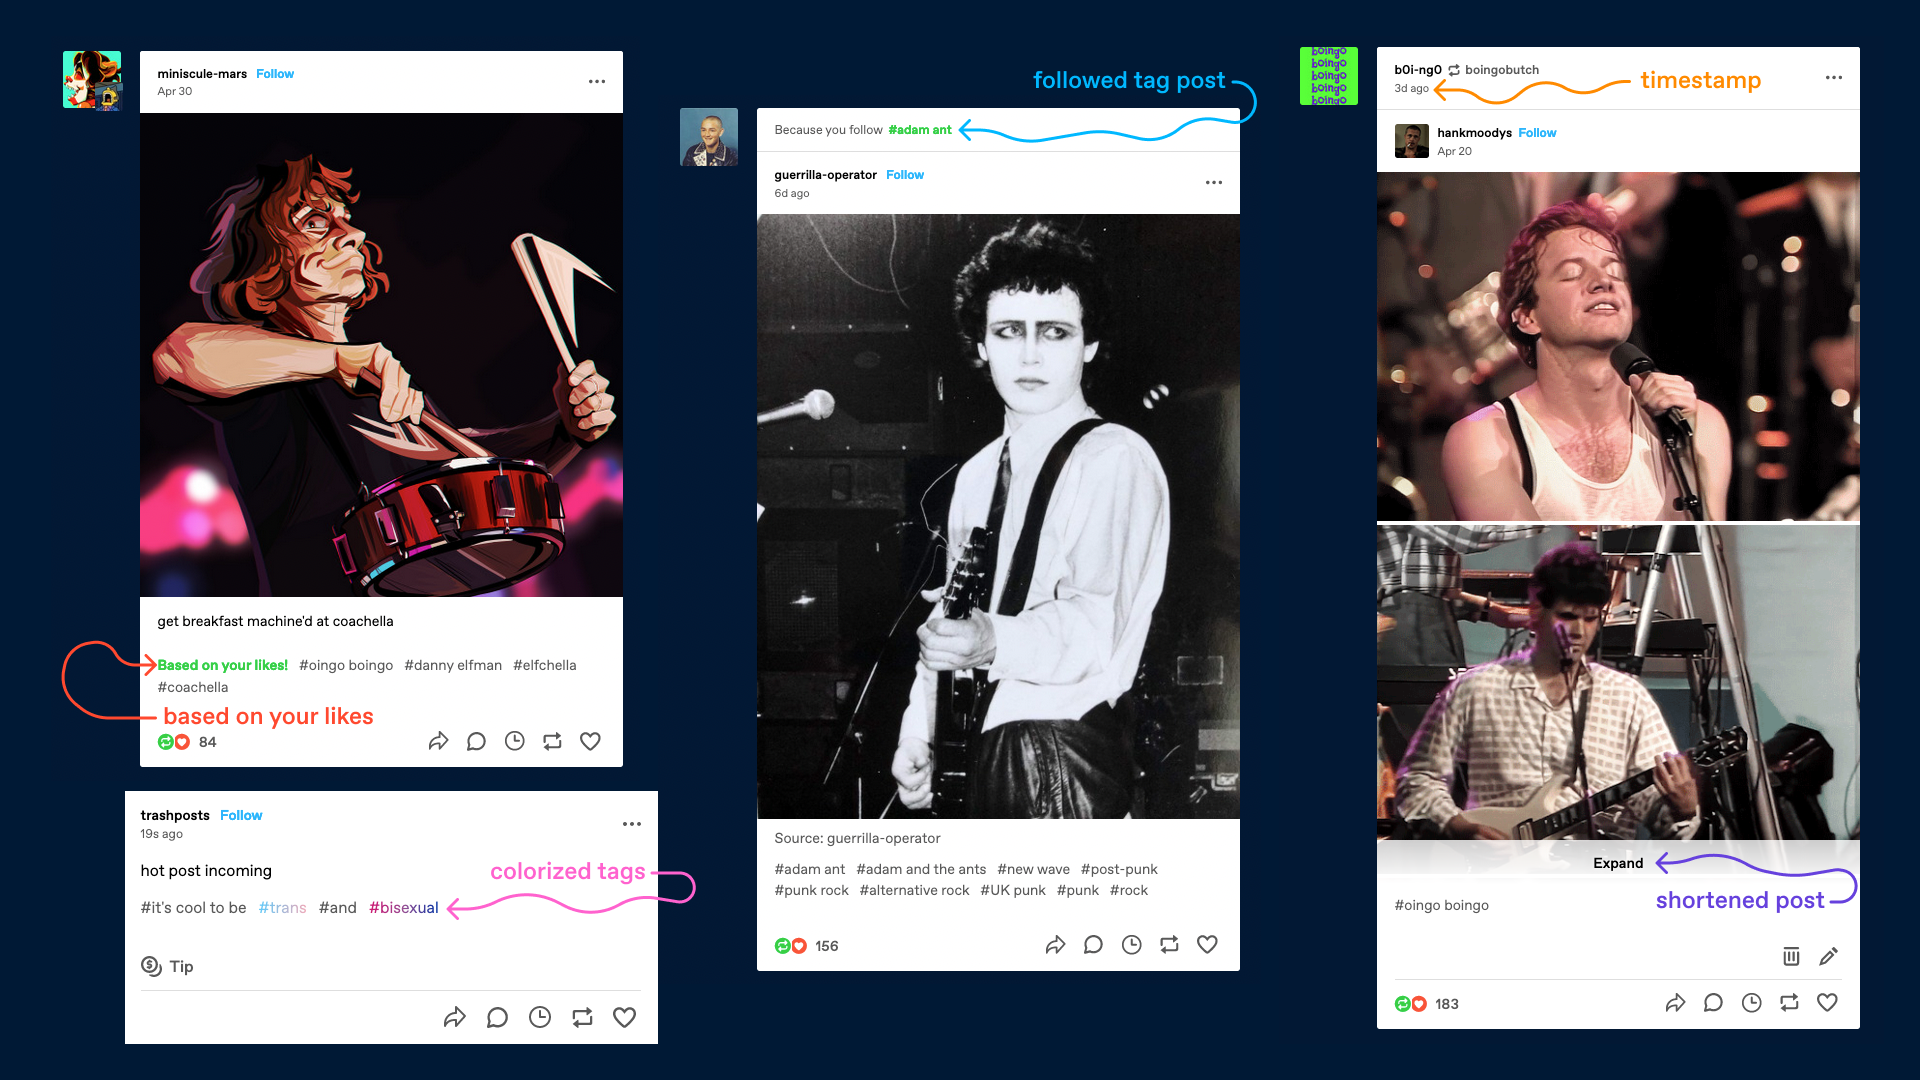 A few examples of the way posts might appear on your dashboard. The first post says "based on your likes", the second post is "because you follow", and the third post shows a timestamp and example of how a shortened post appears.